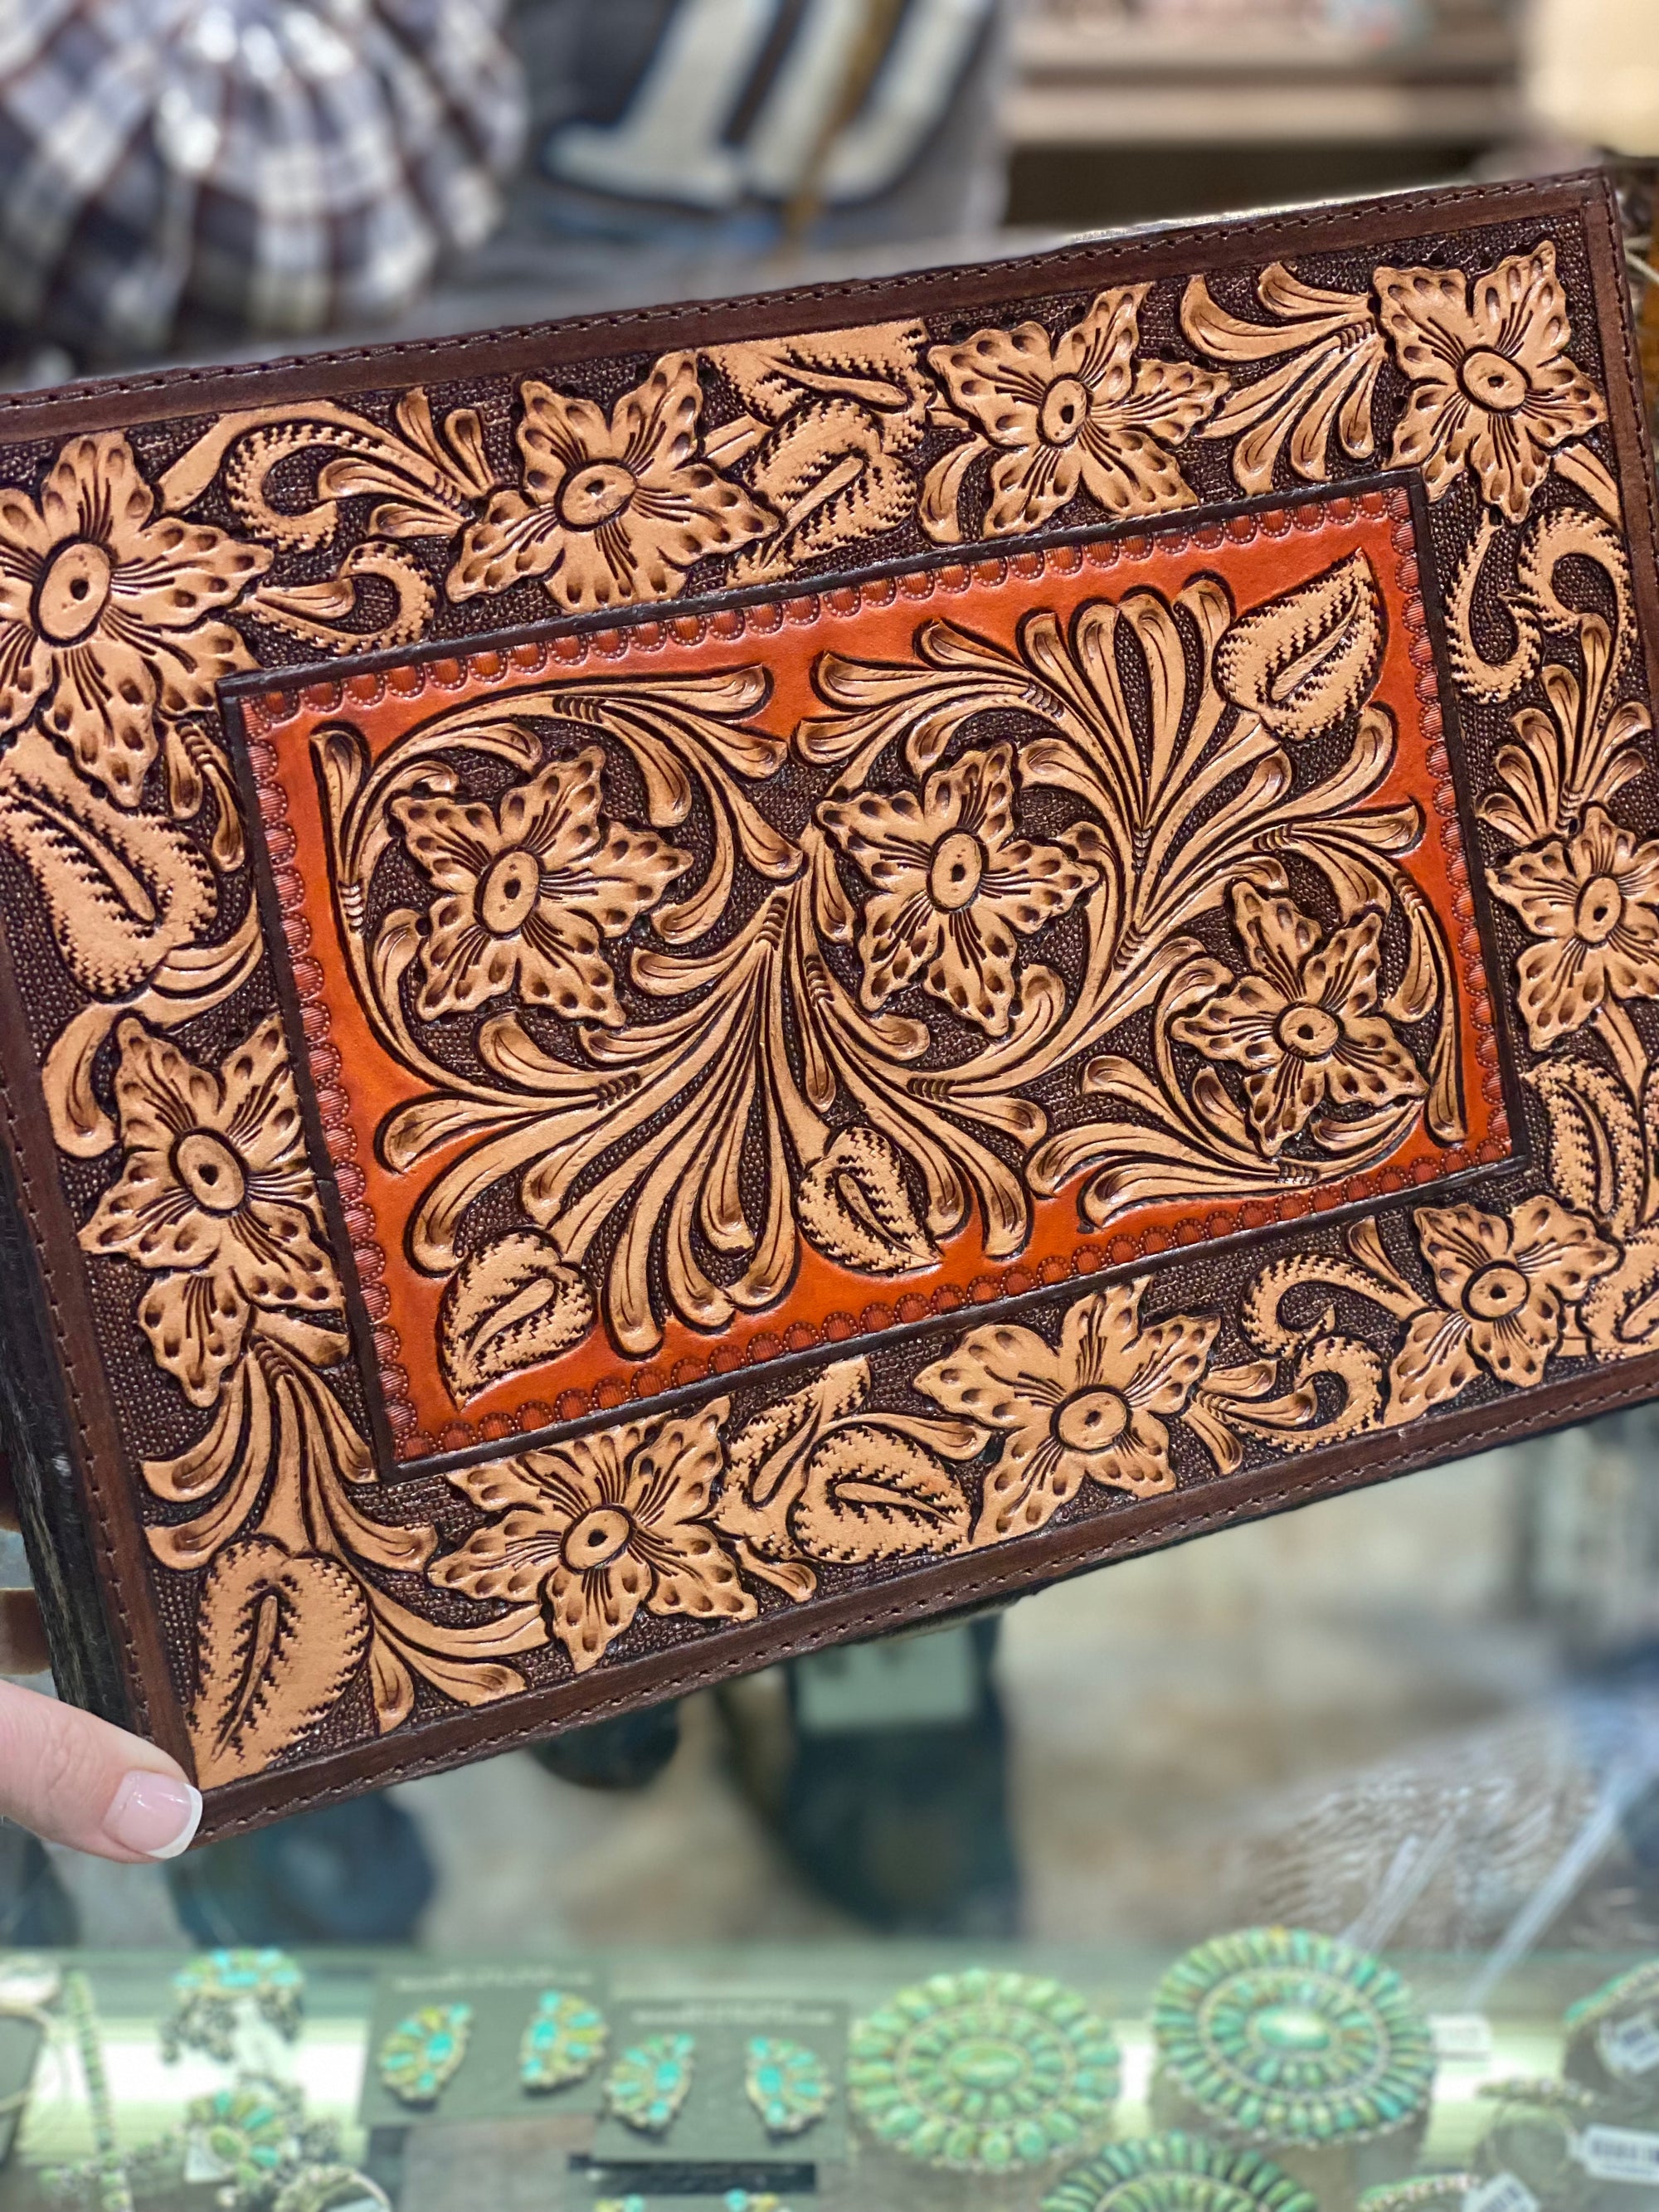 Tooled Leather and Hair on Hide Jewelry Box